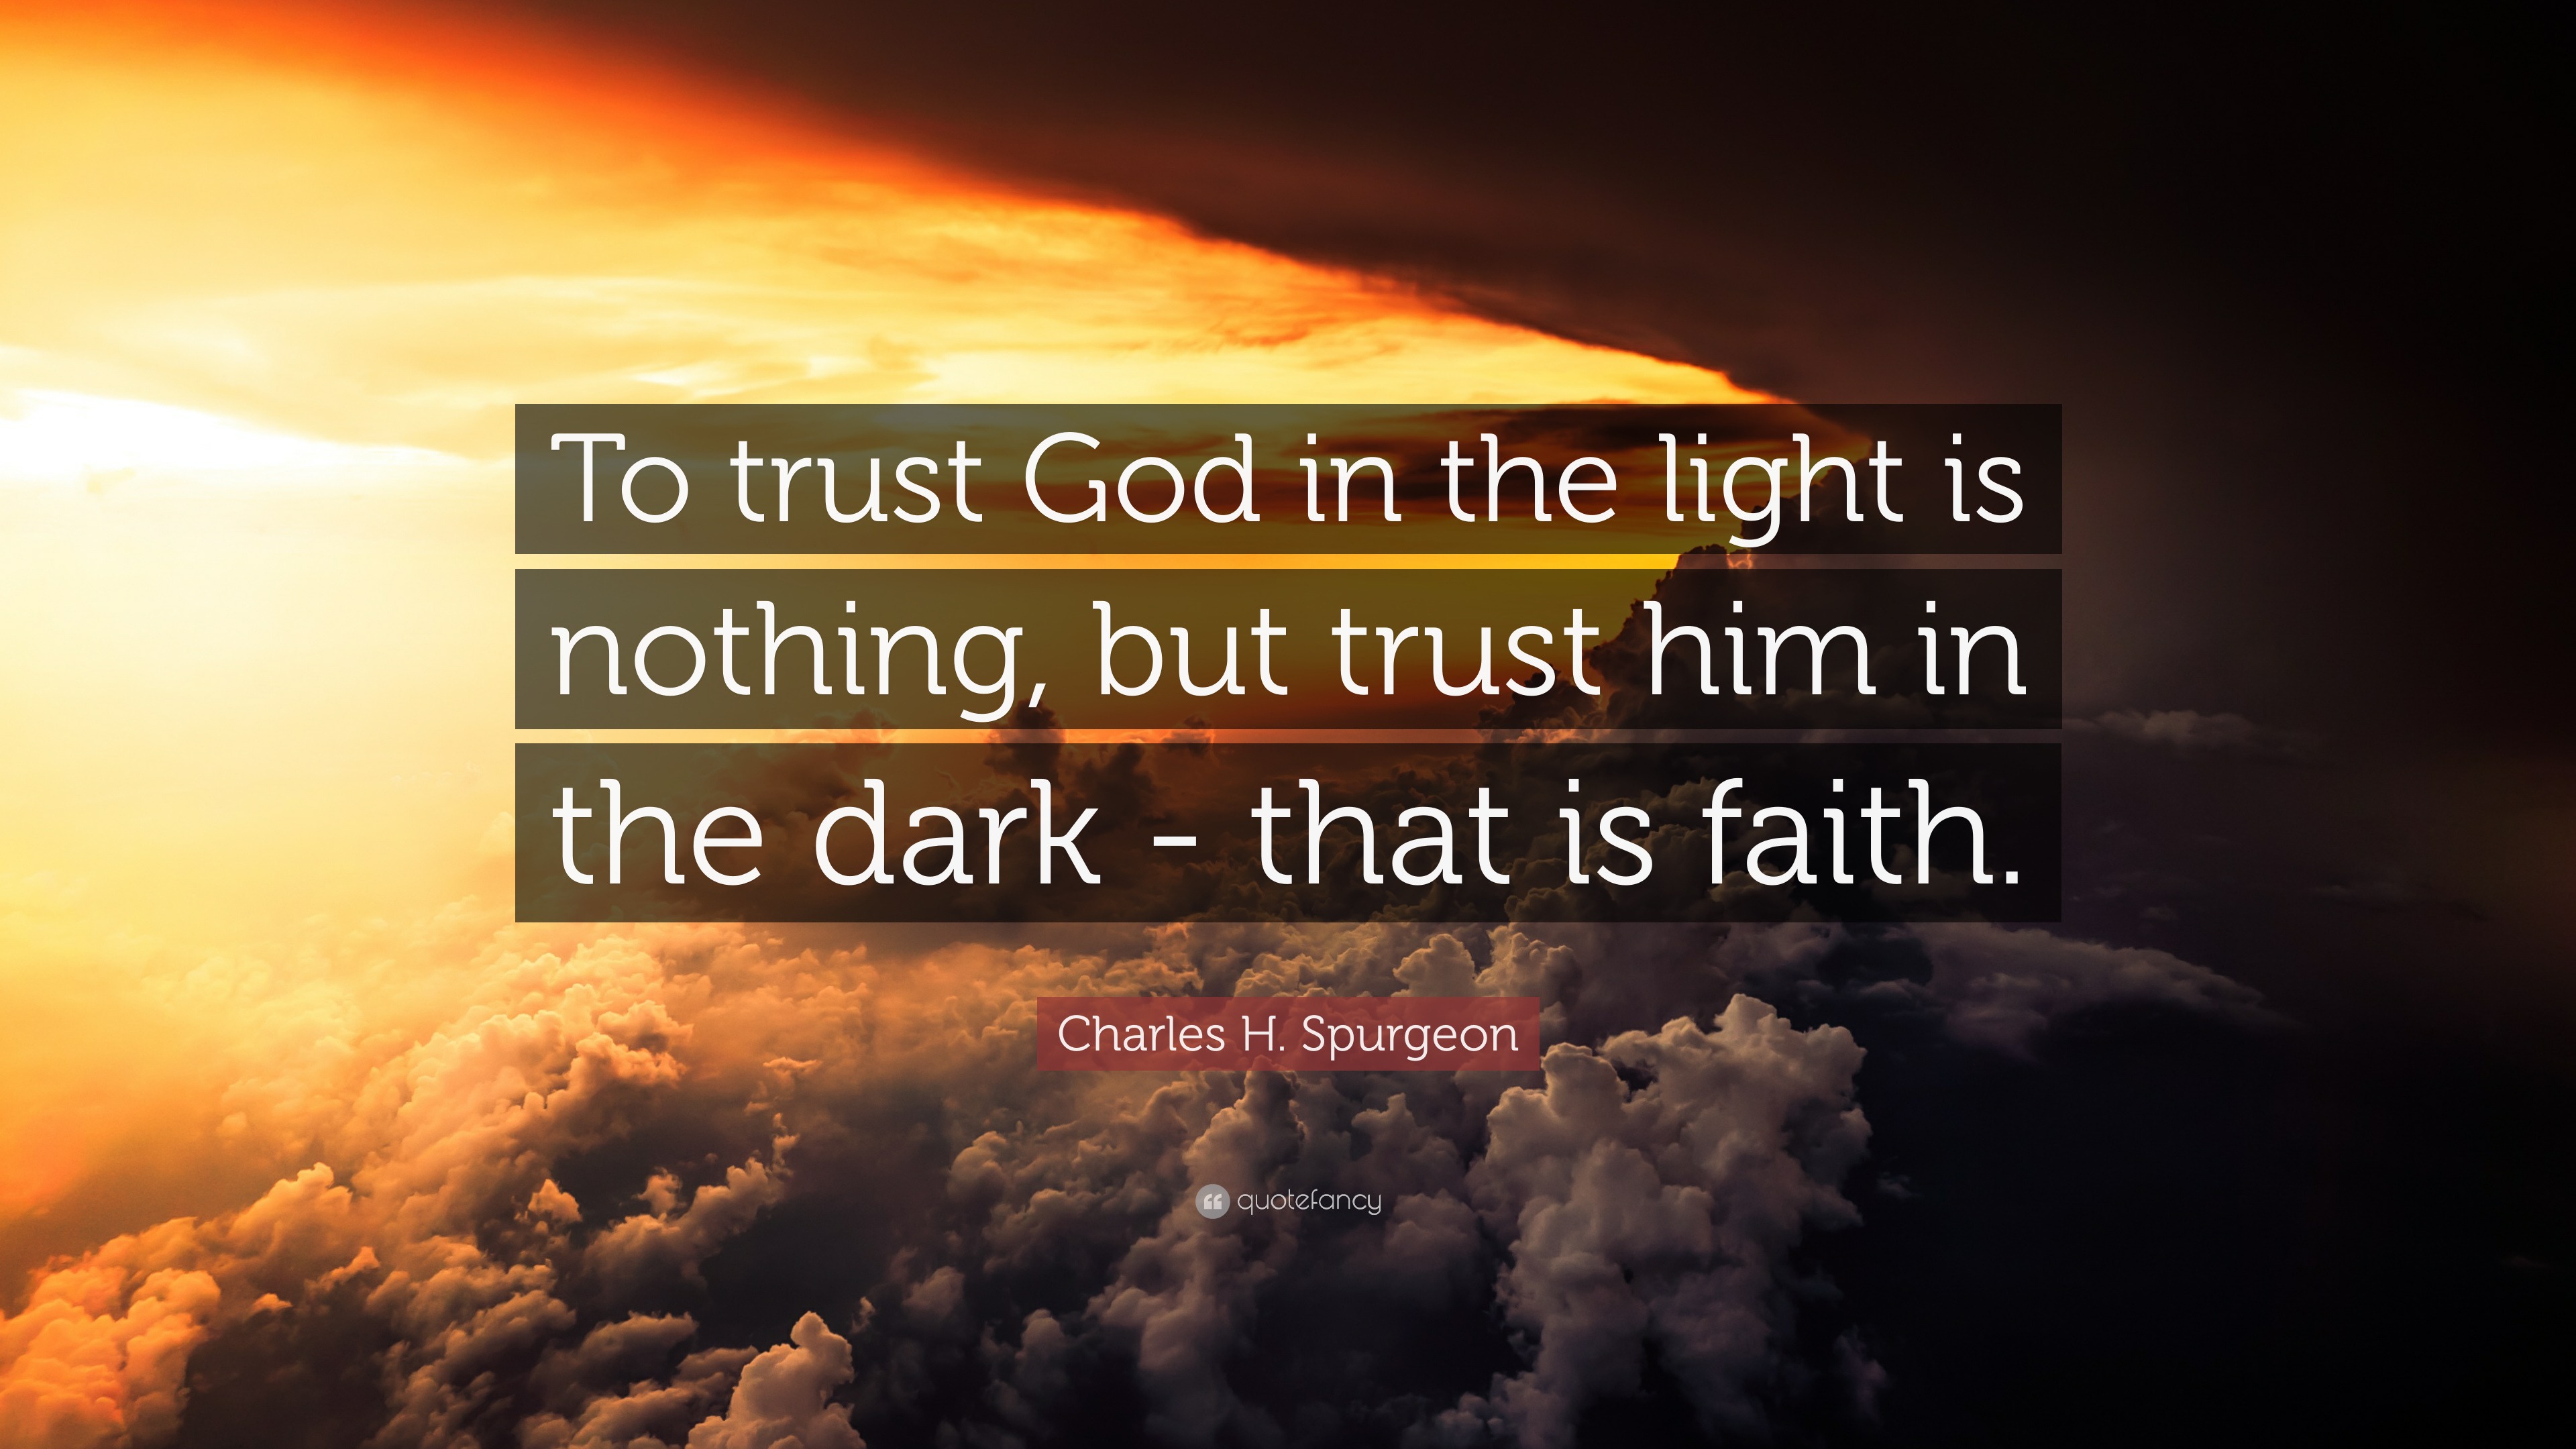 Charles H. Spurgeon Quote “To trust God in the light is